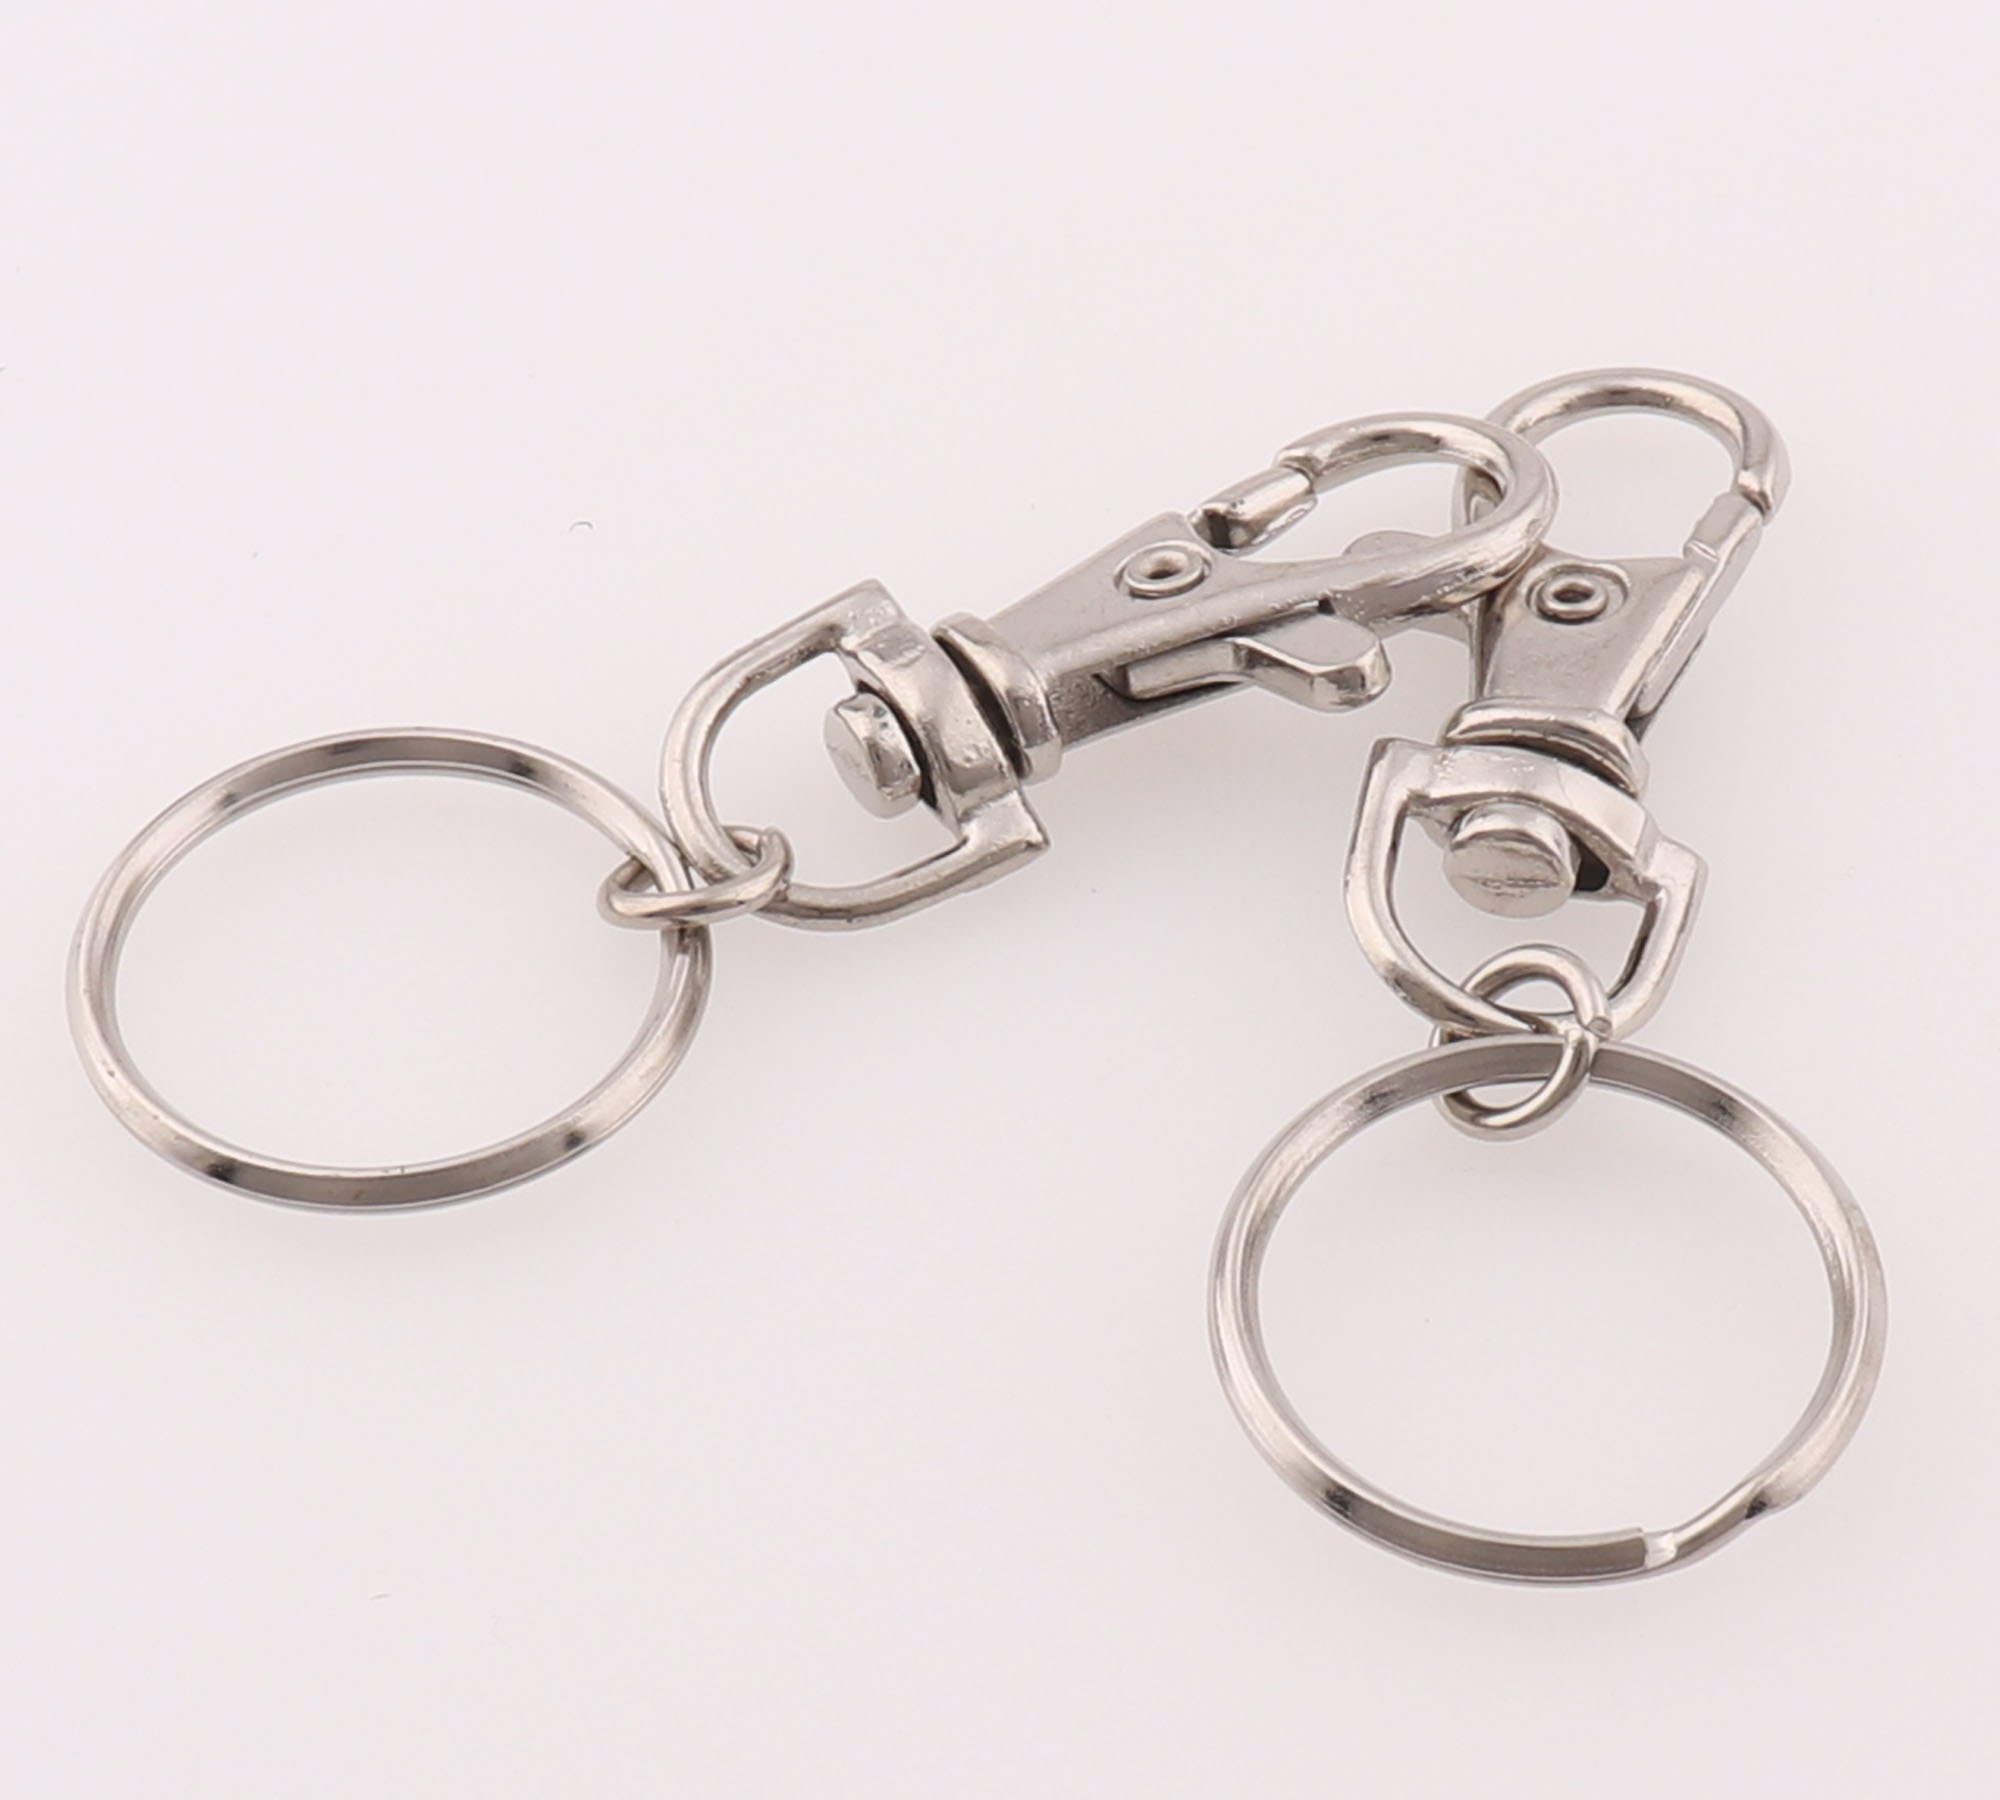 Rings Keychain Bruce&Shark Color: Silver